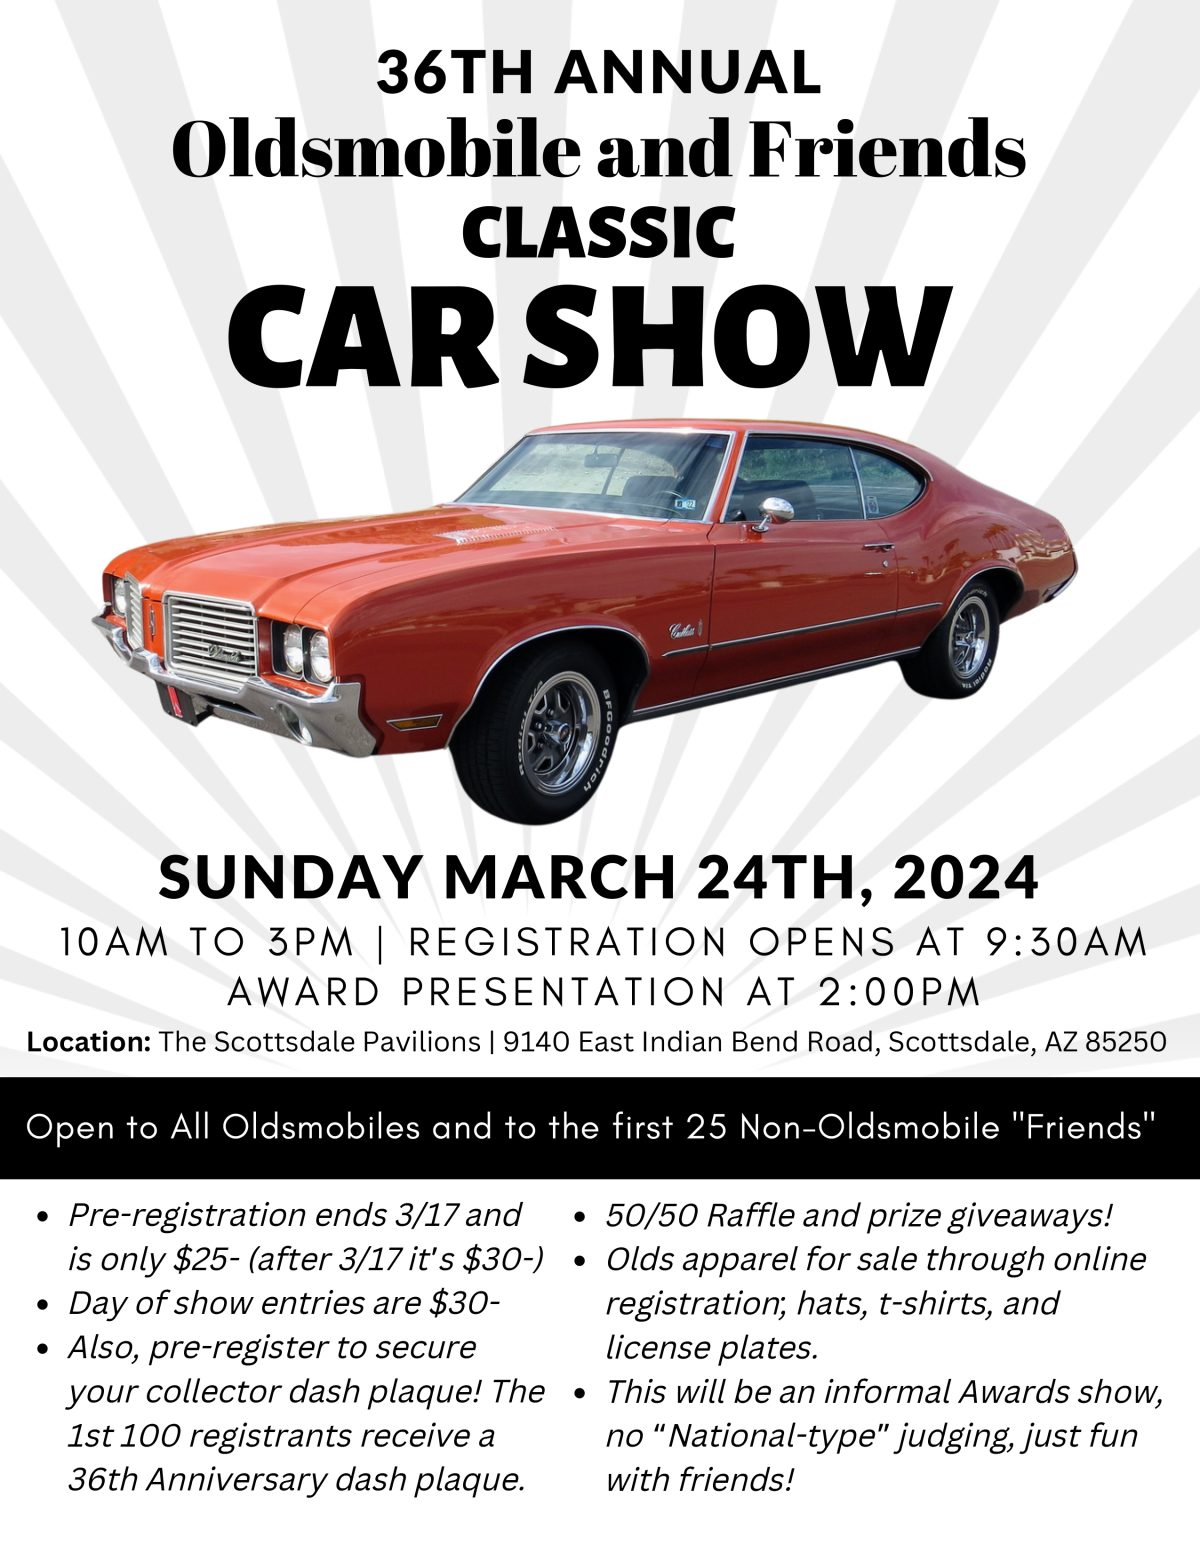 Oldsmobile and Friends Classic Car Show